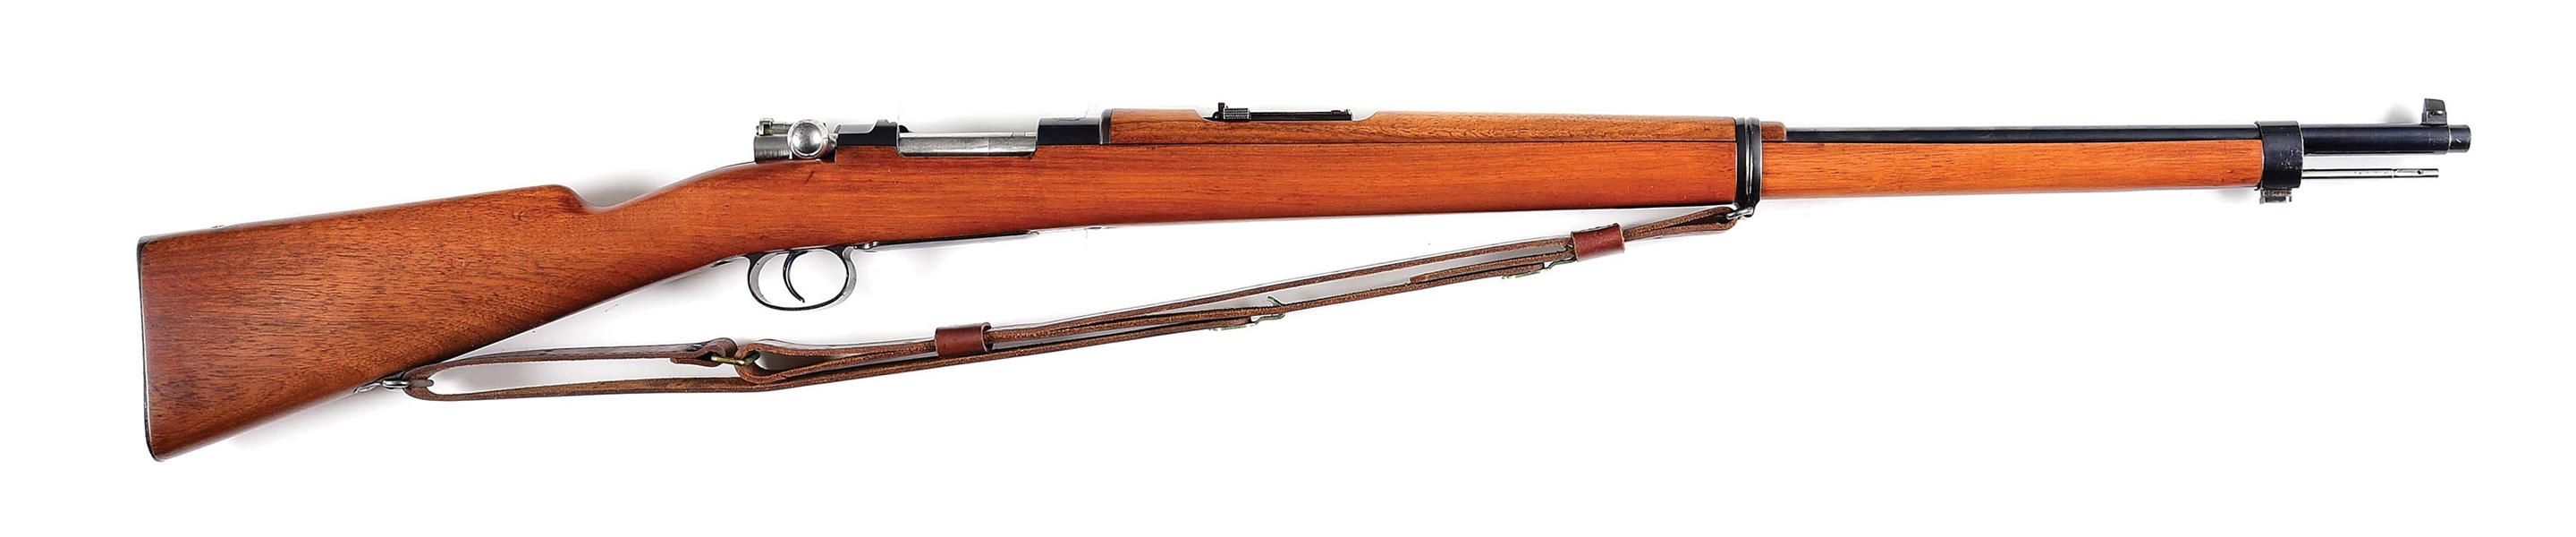 (A) CHILEAN CONTRACT MAUSER MODEL 1895 BOLT ACTION RIFLE MANUFACTURED BY LOEWE.